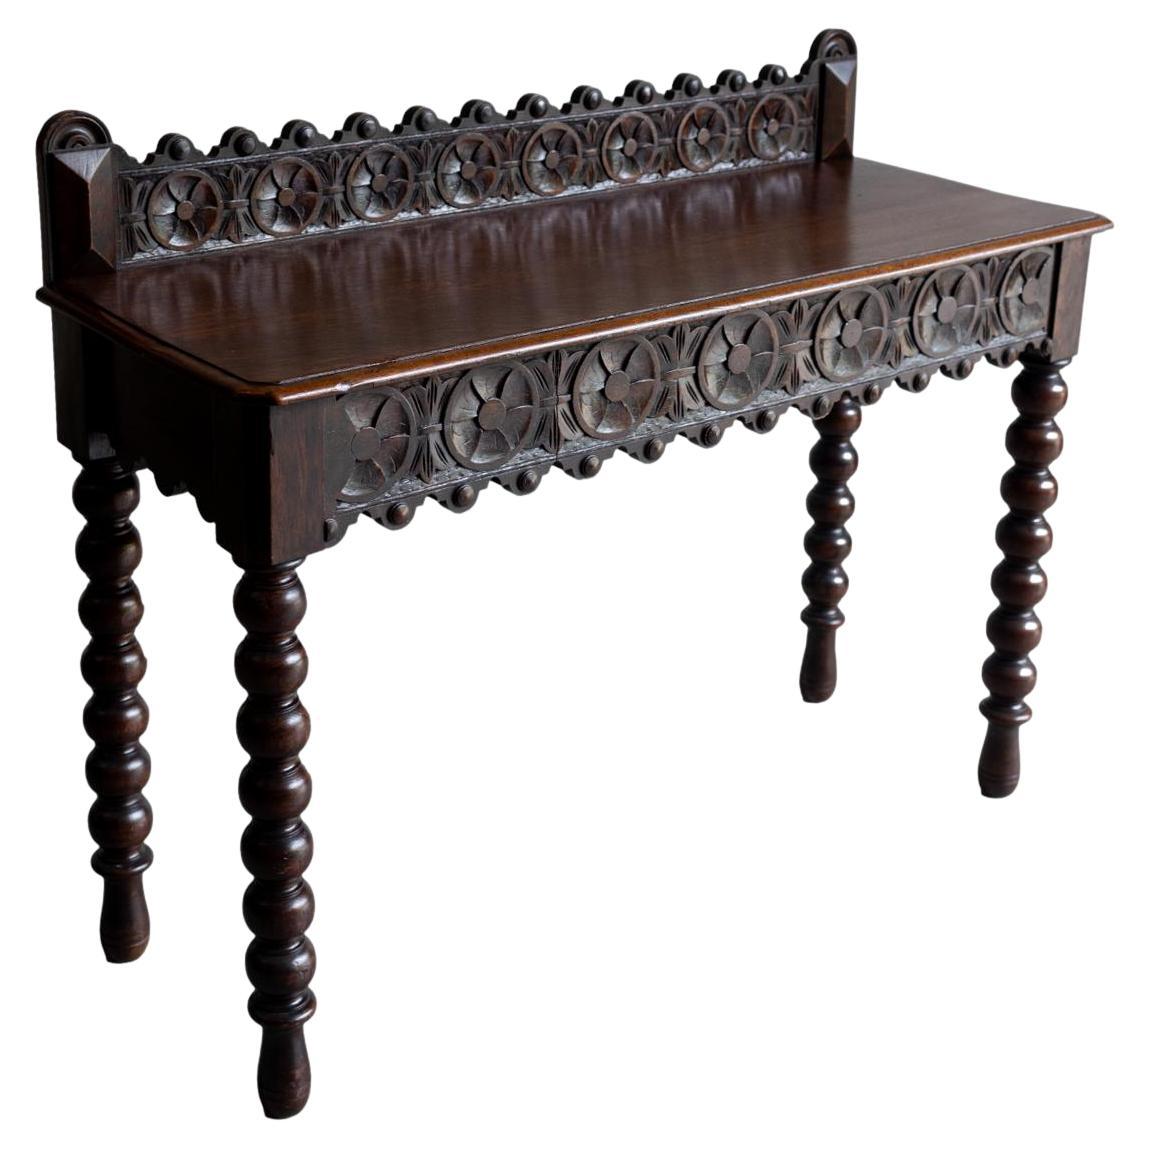 A Gothic Hand-Carved Oak Console Table, Hidden Frieze Drawer, English, ca. 1870 For Sale